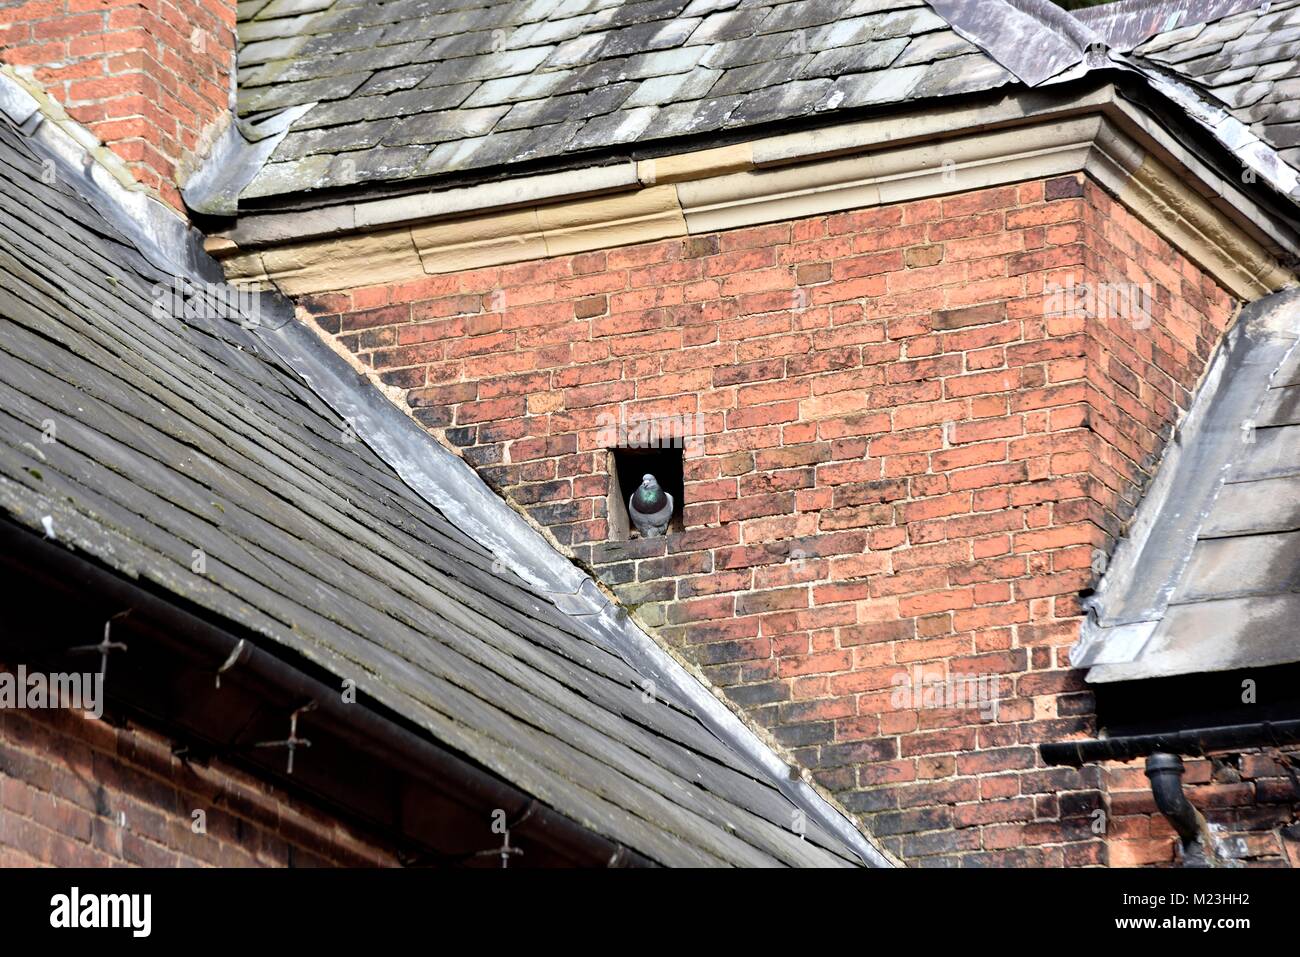 Pigeon sitting in a hole in the side of an old building Wollaton Park Nottingham England UK Stock Photo